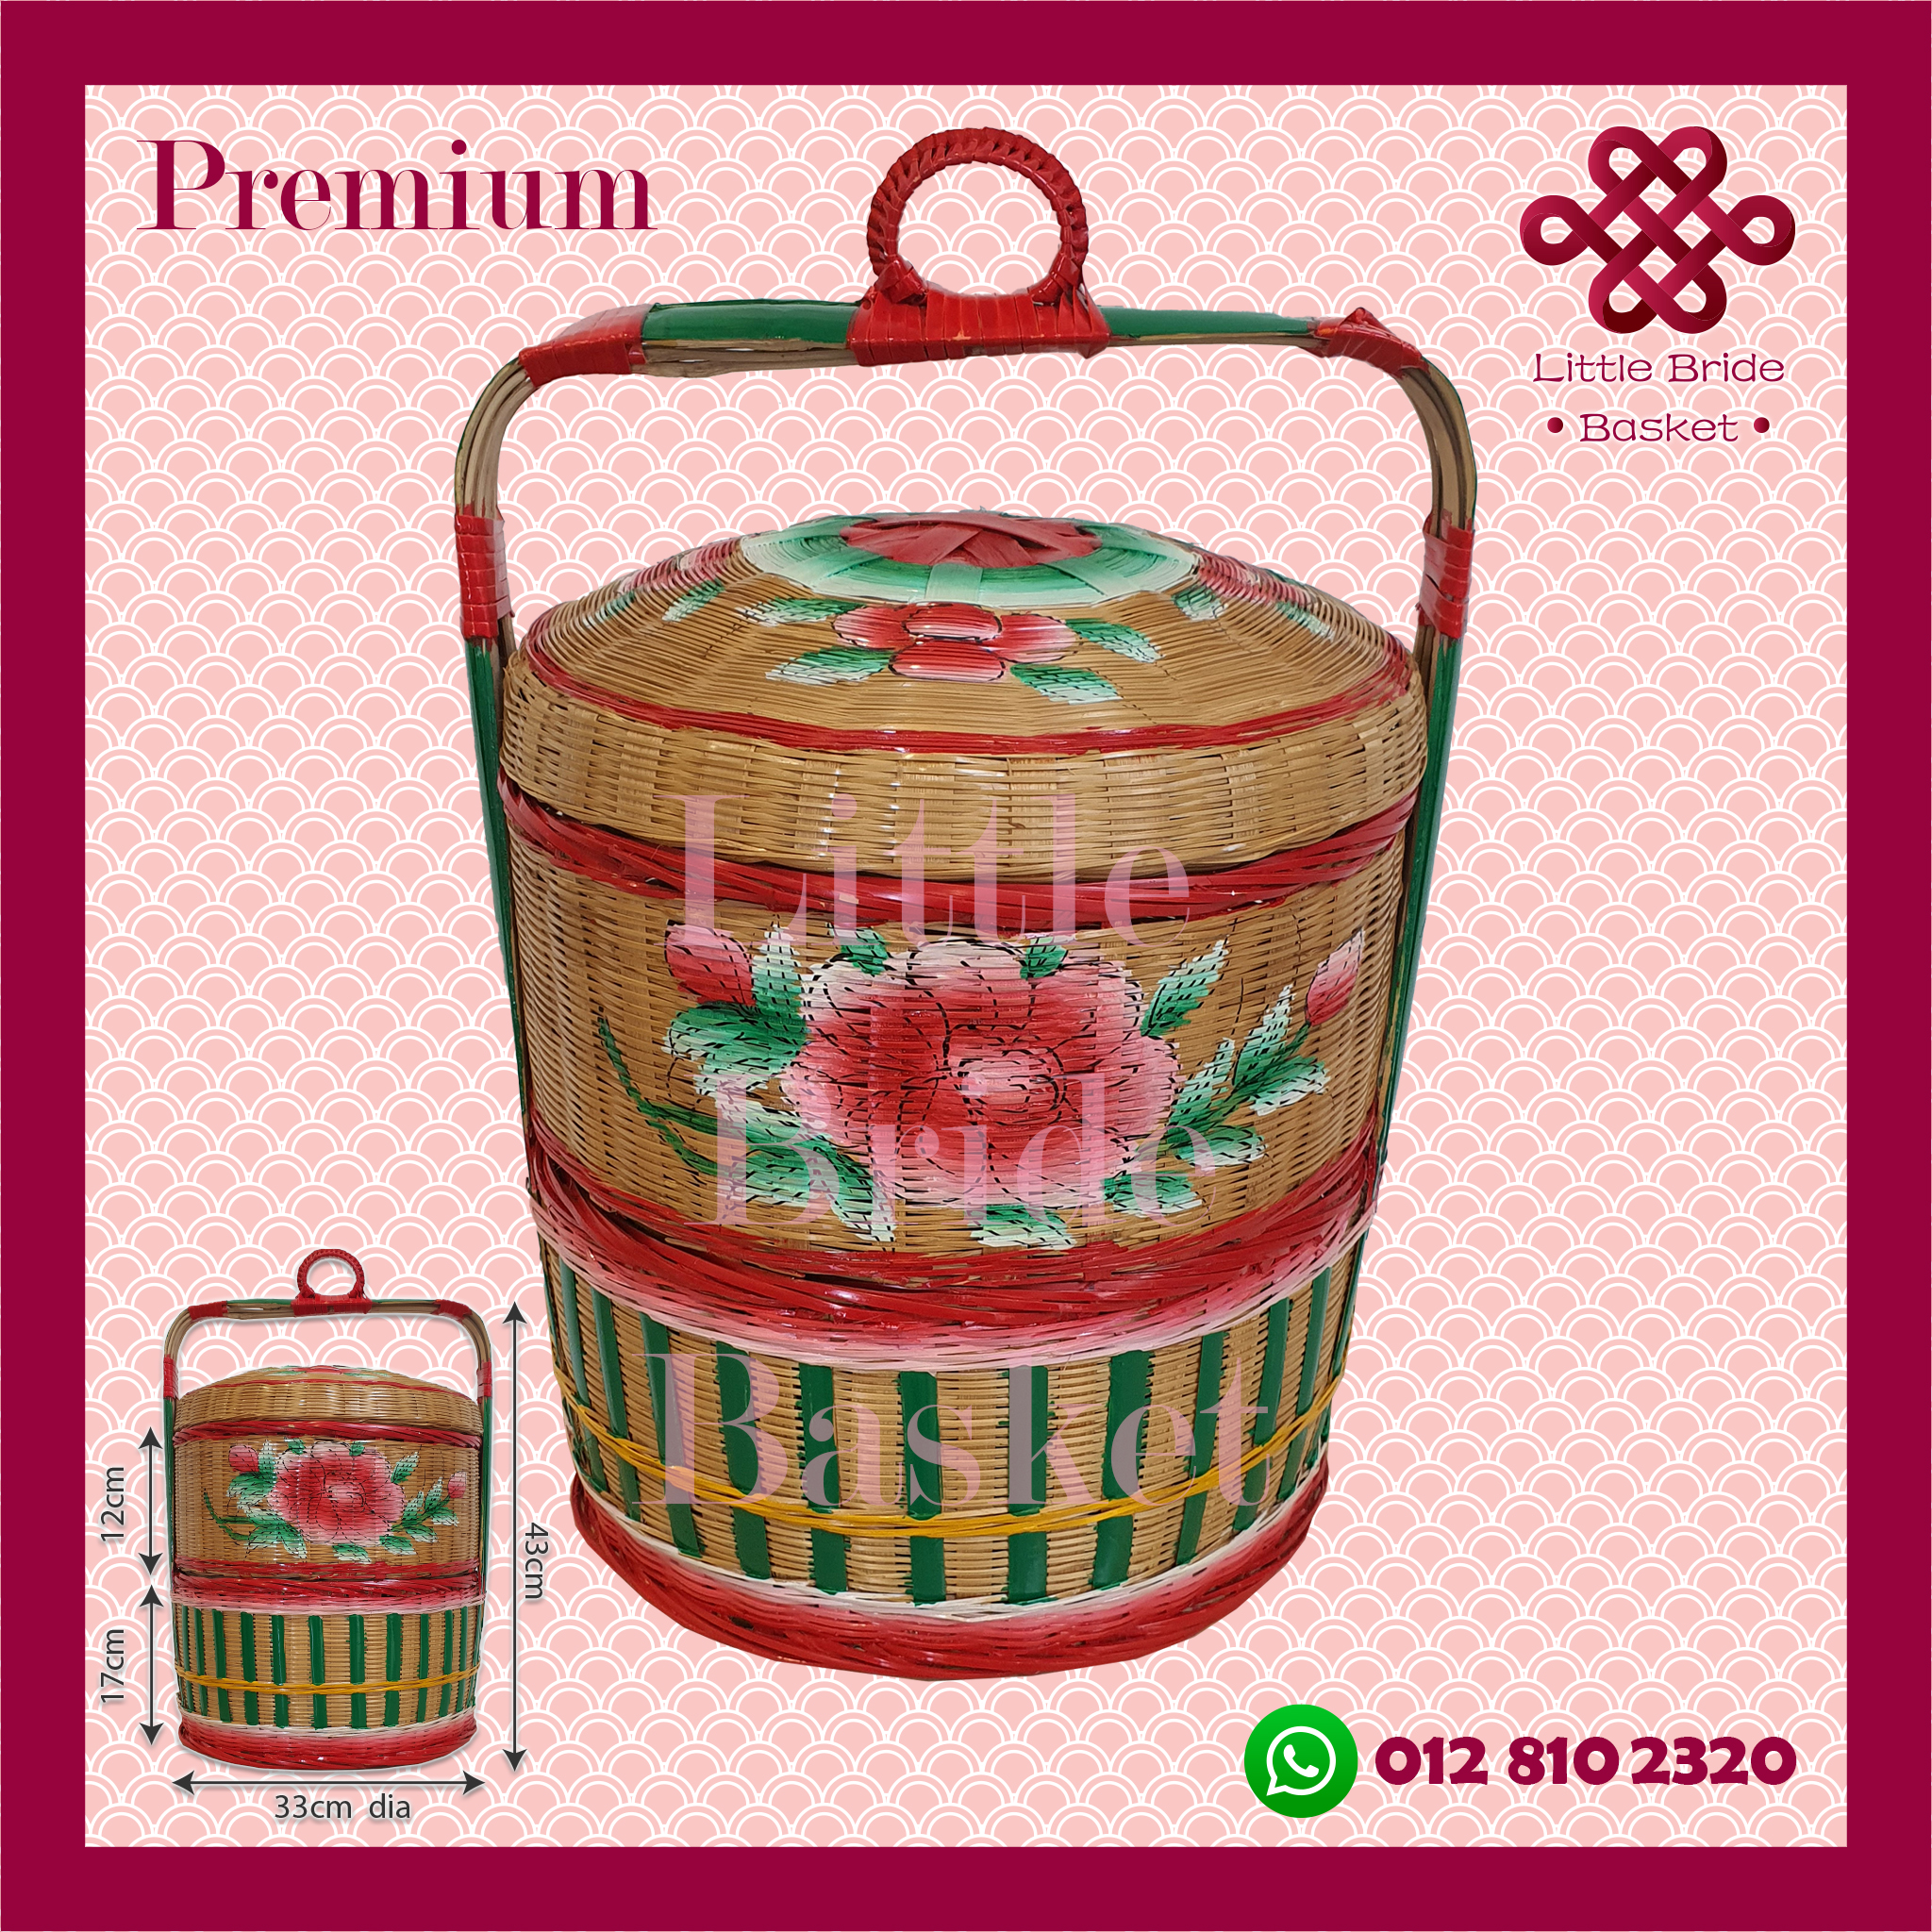 Premium Traditional Handmade Wedding Basket for Rent | RentSmart Asia | Renting Is The New Buying